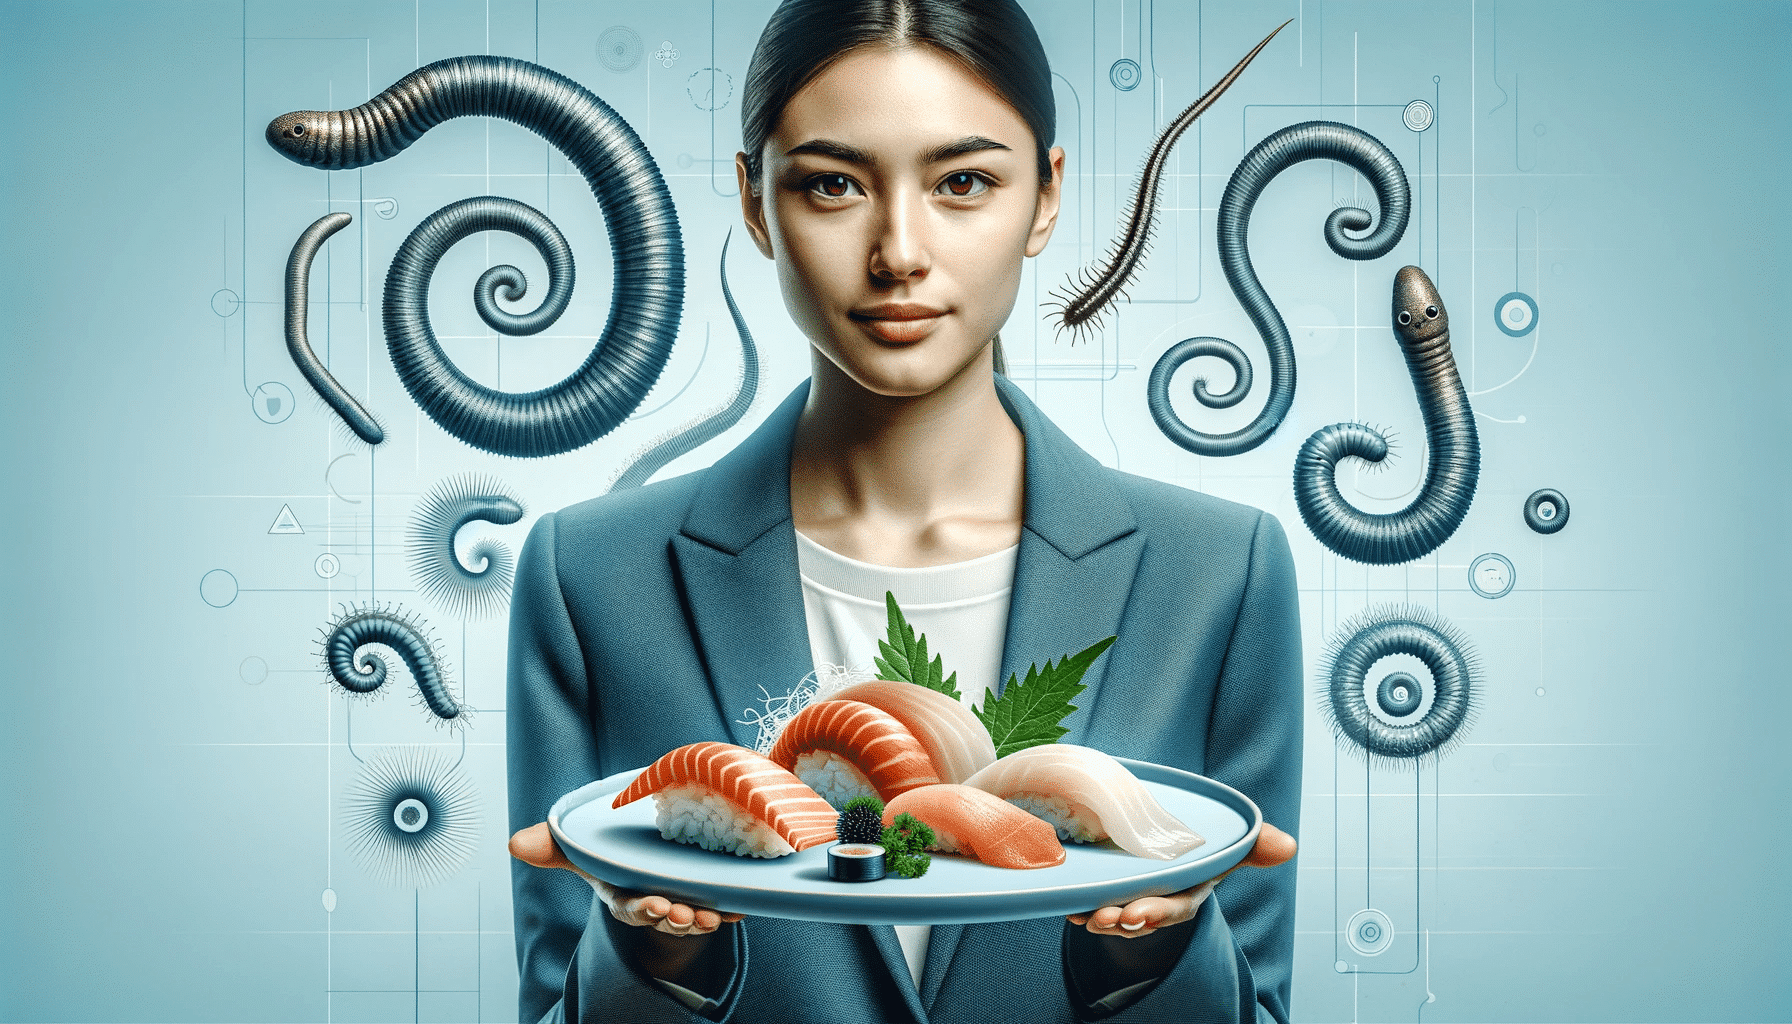 A person of mixed Caucasian and Latin American descent, around 30 years old, holding a sophisticated plate of sashimi in a clean, high-resolution envi.